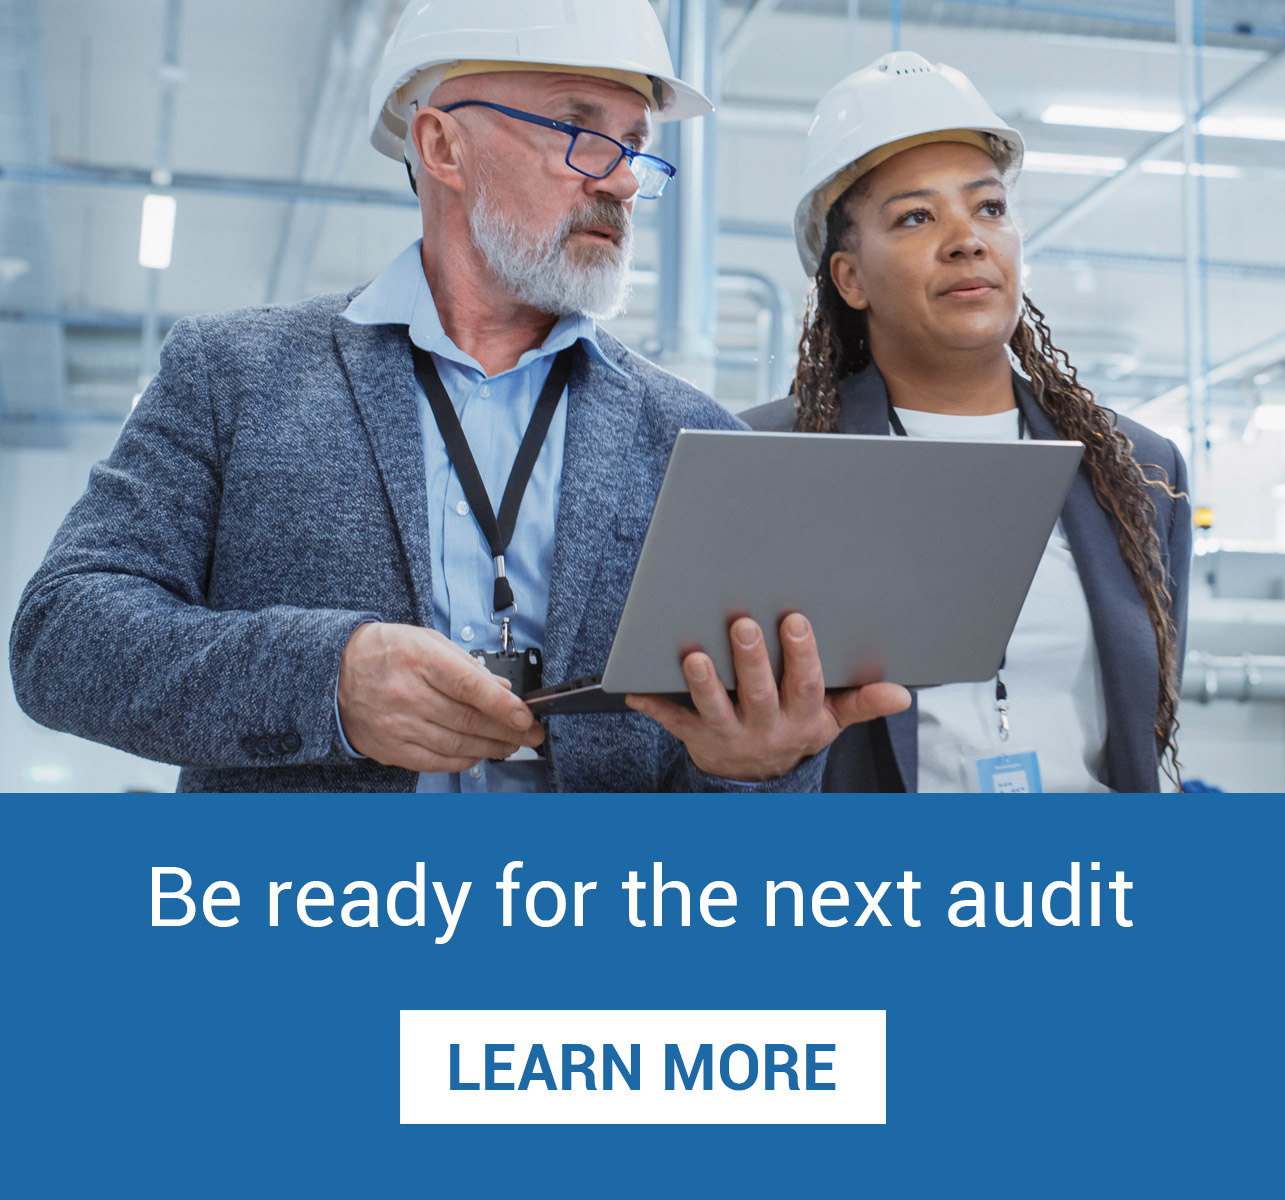 Be ready for the next audit with document control software